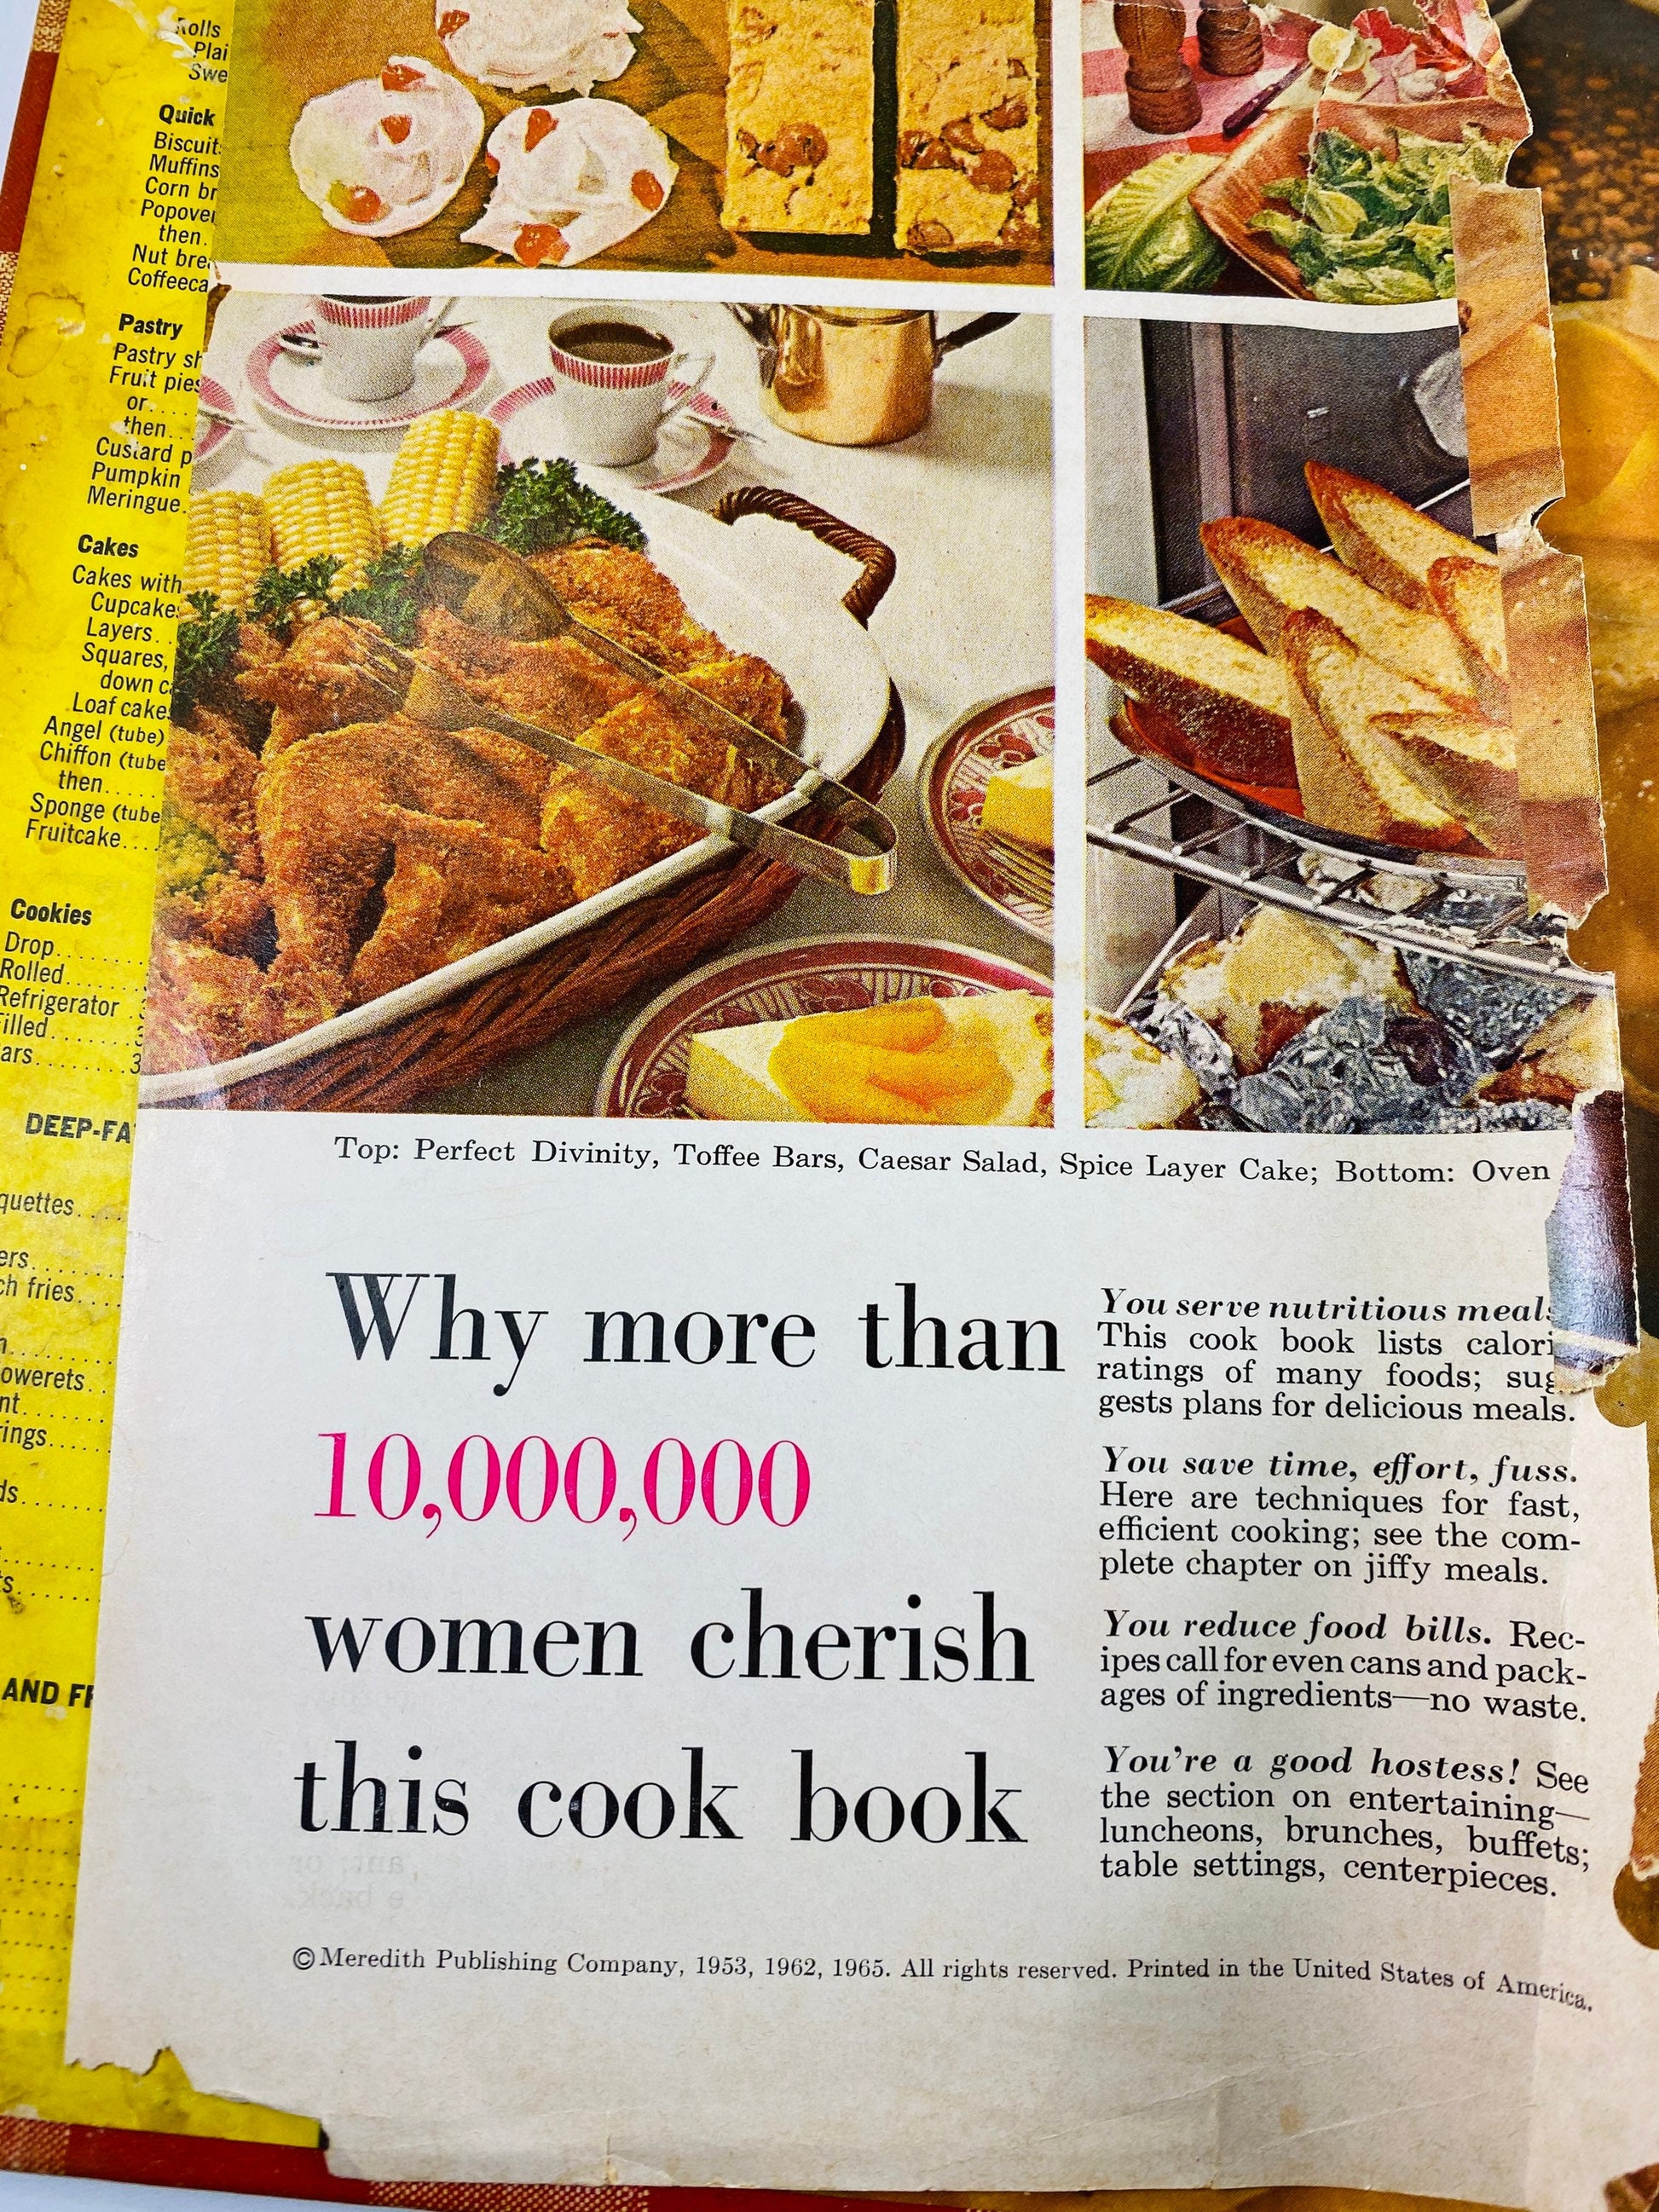 Better Homes and Gardens Cook book circa 1965 Red & white vintage gingham decor Retro kitchen cookbook binder Mother’s Day gift